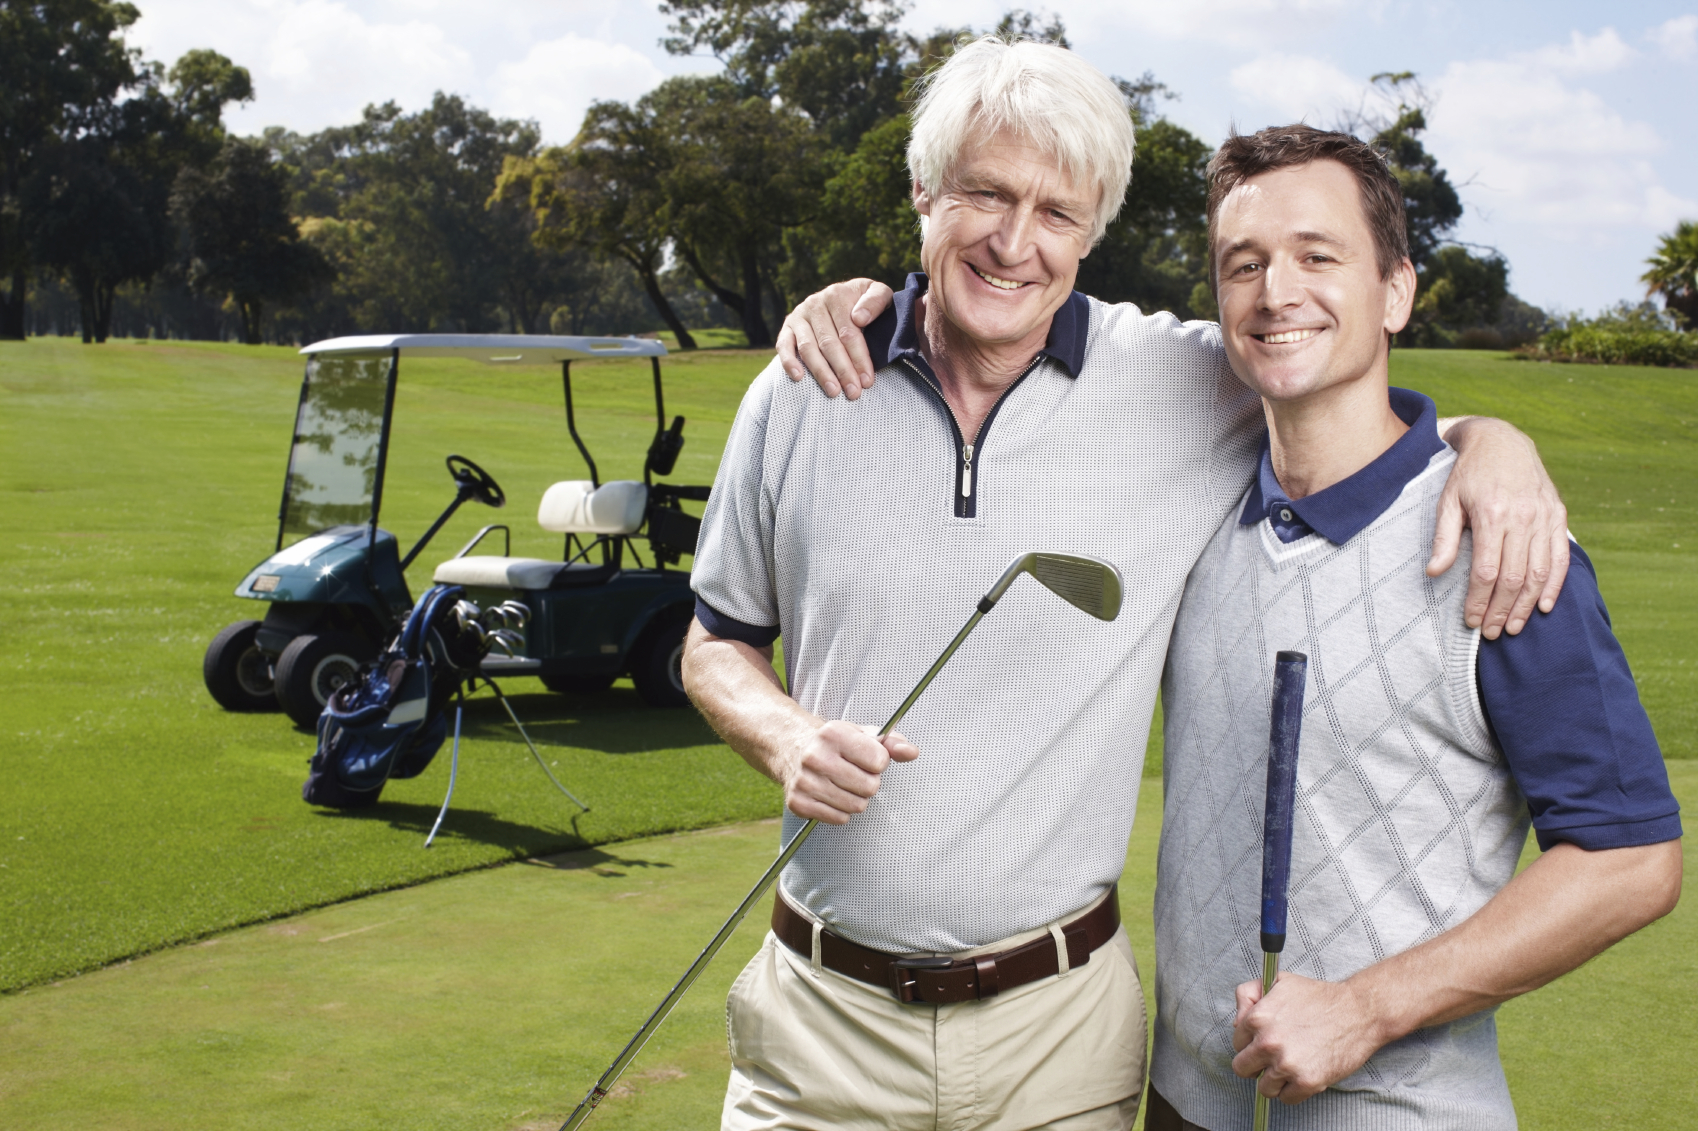 How to Make Your Charity Golf Tournament Fun for Everyone